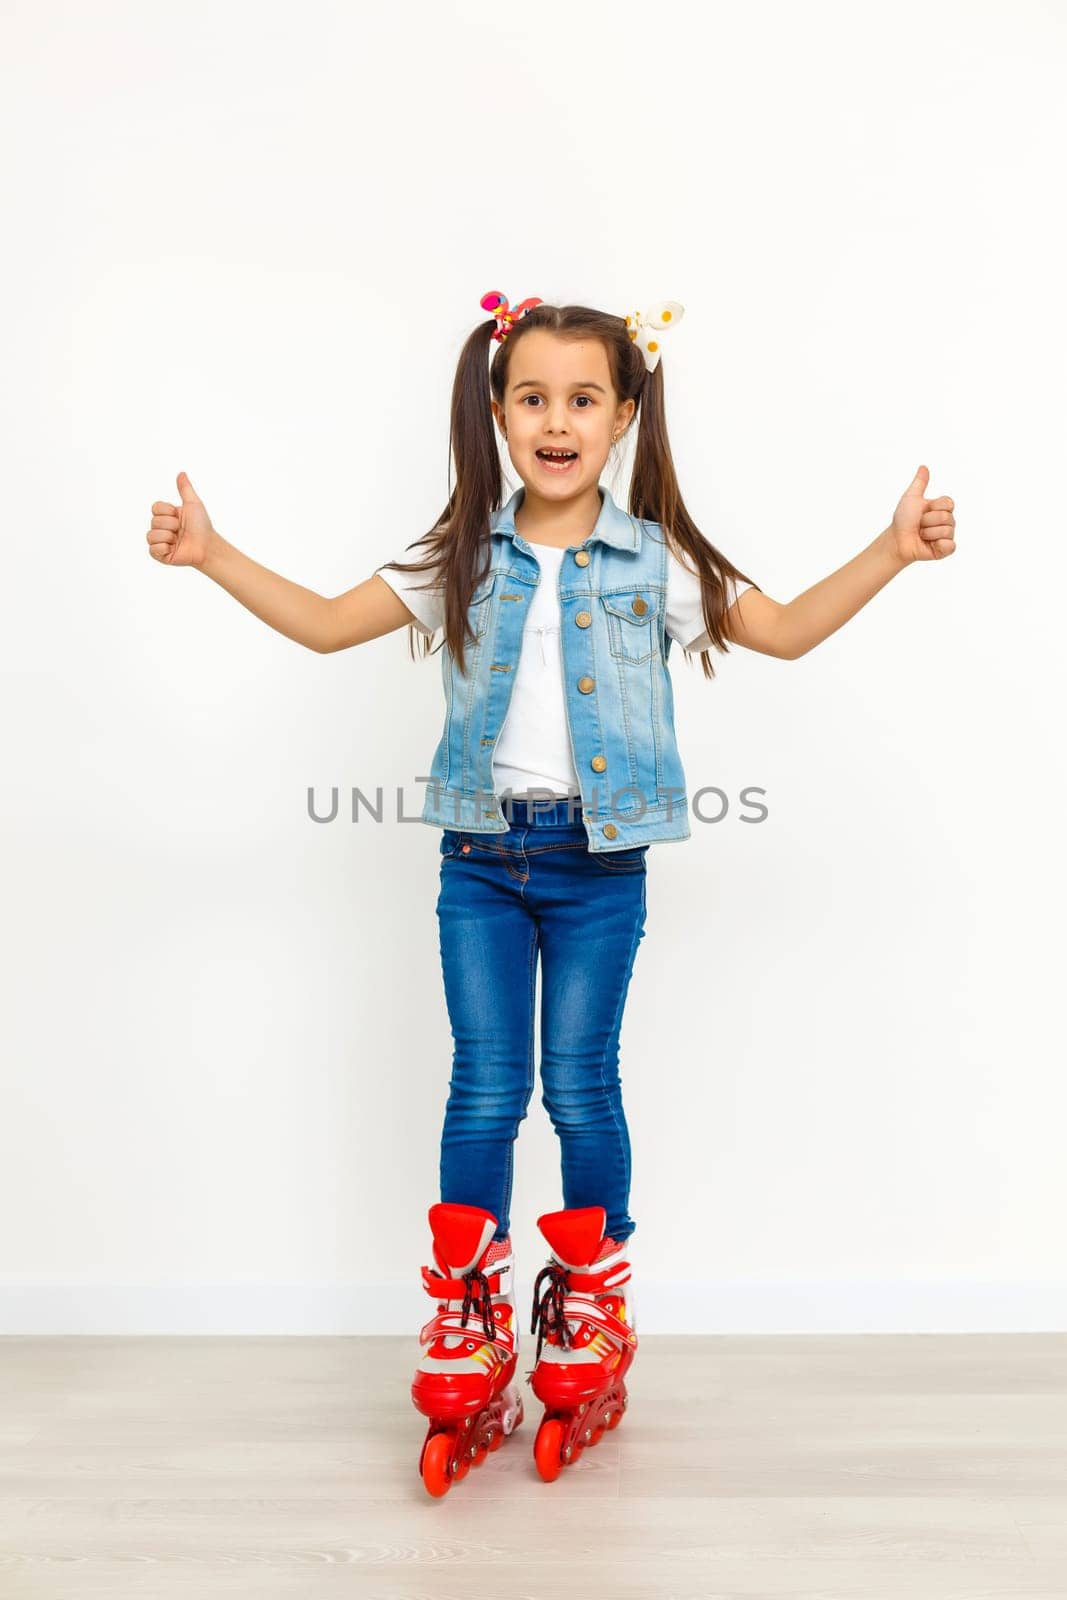 Cute girl in roller skates on a white background by Andelov13